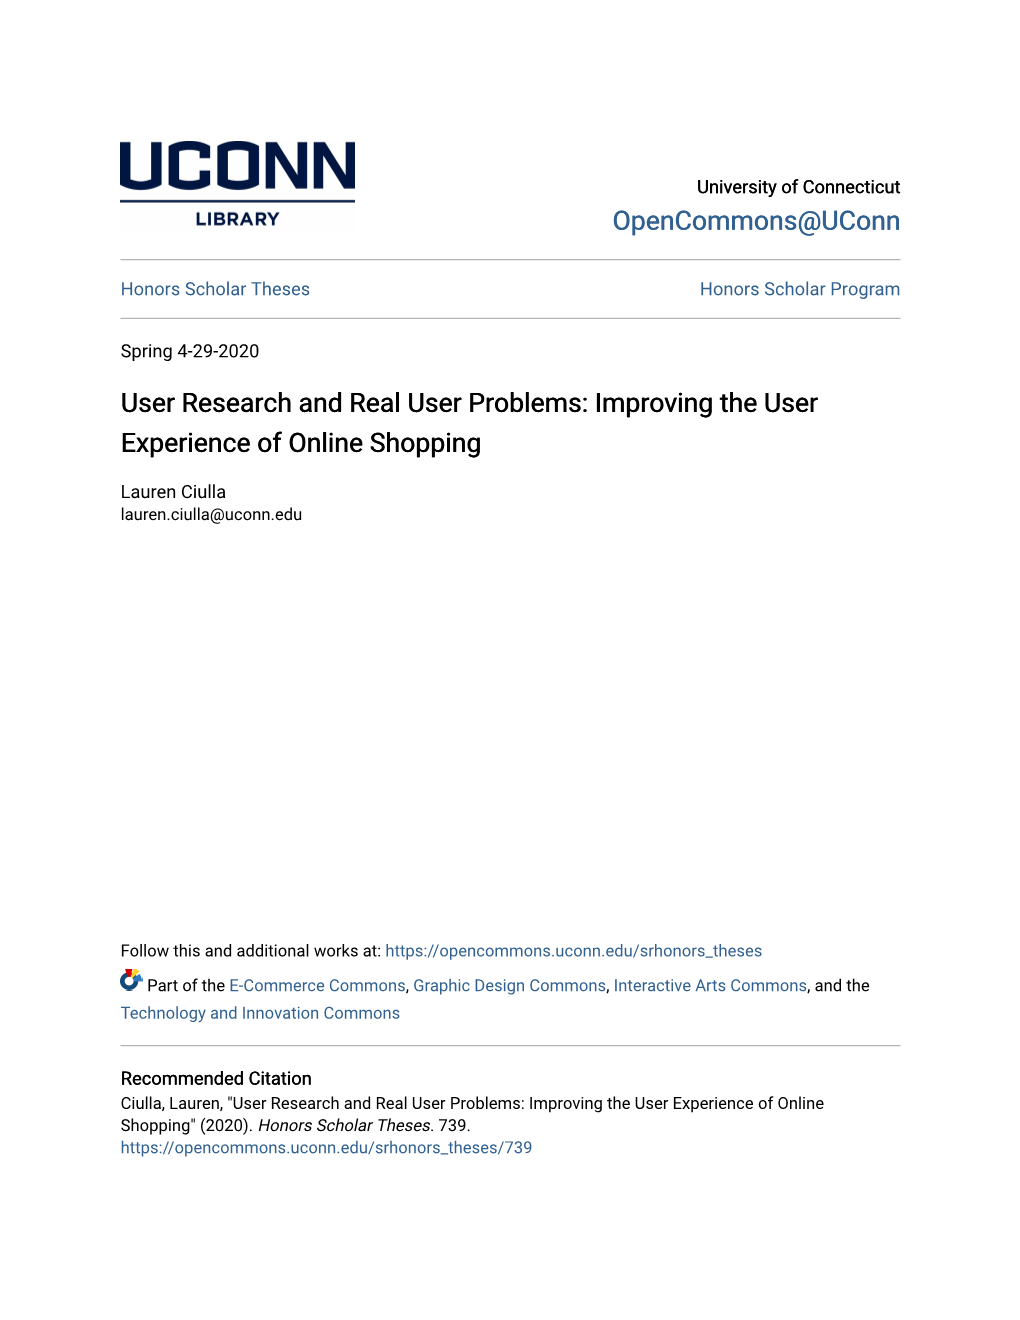 User Research and Real User Problems: Improving the User Experience of Online Shopping